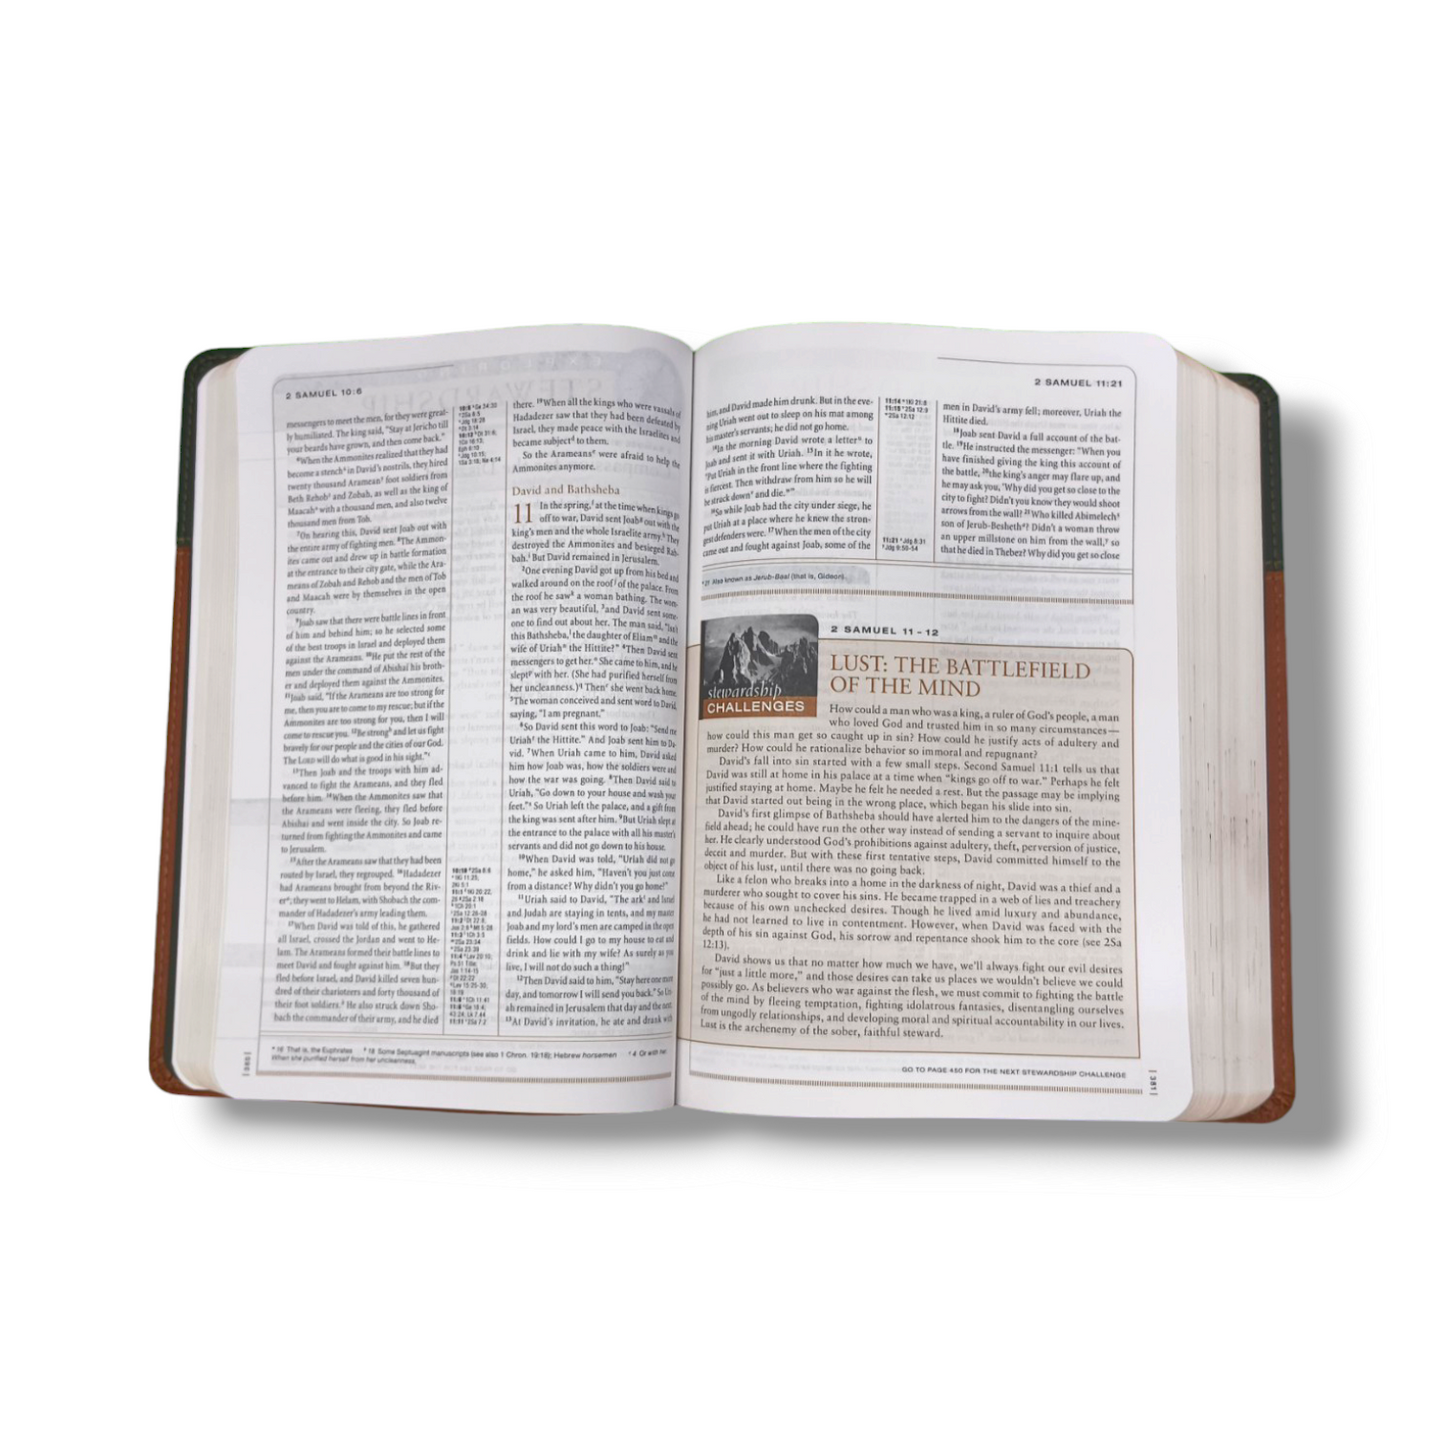 NKJV The Open Bible | Complete Reference System | Study Bible  Black Leather Cover Edition | Personal Reference | With Related Pictures  | New Edition